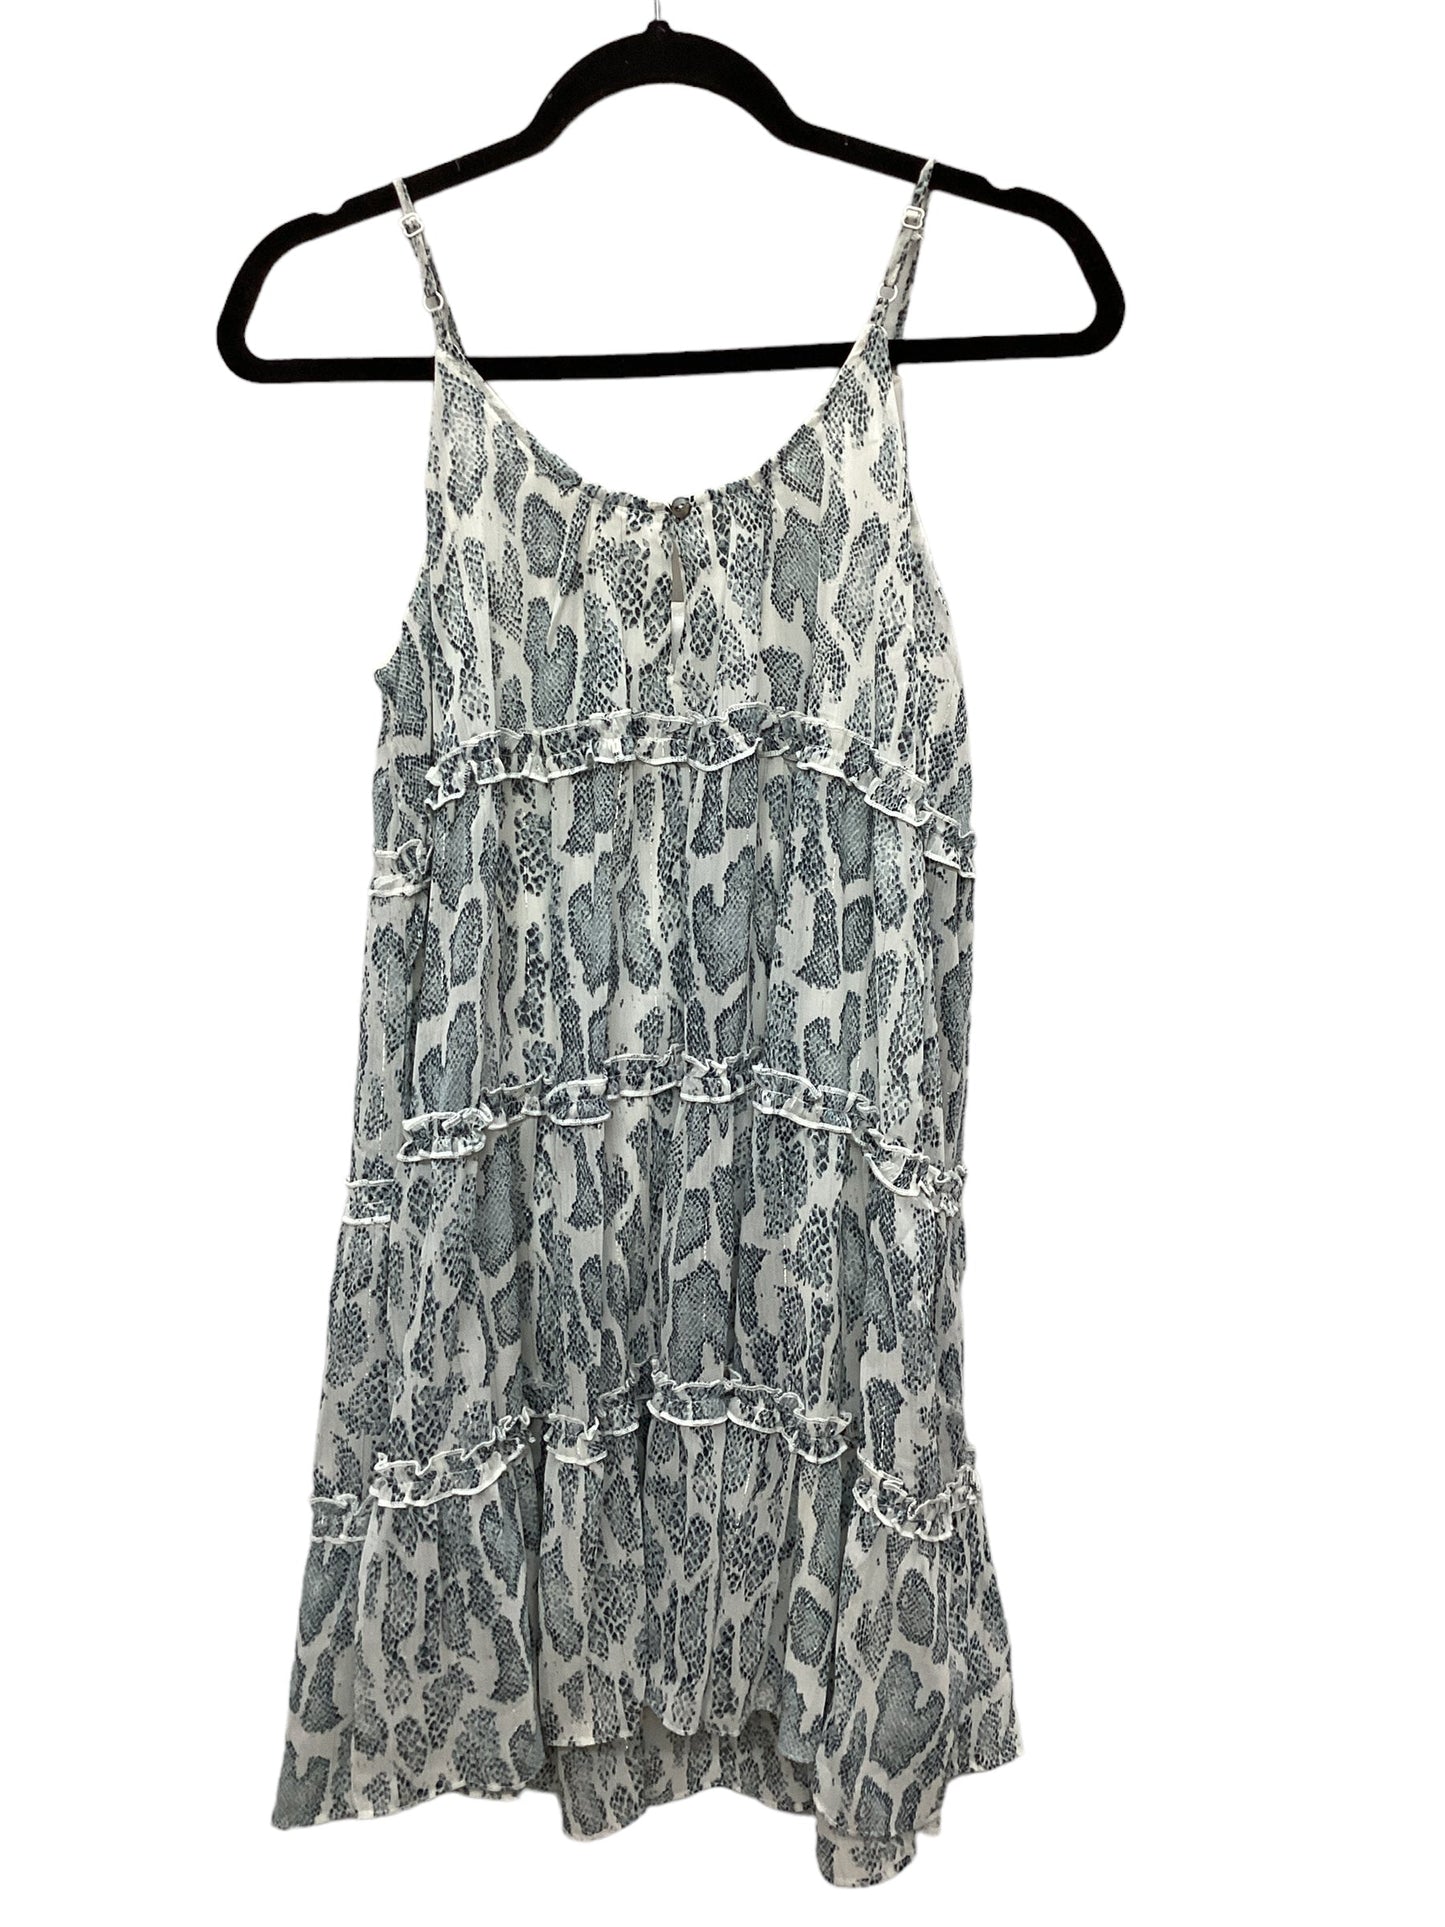 Dress Casual Short By She + Sky  Size: S